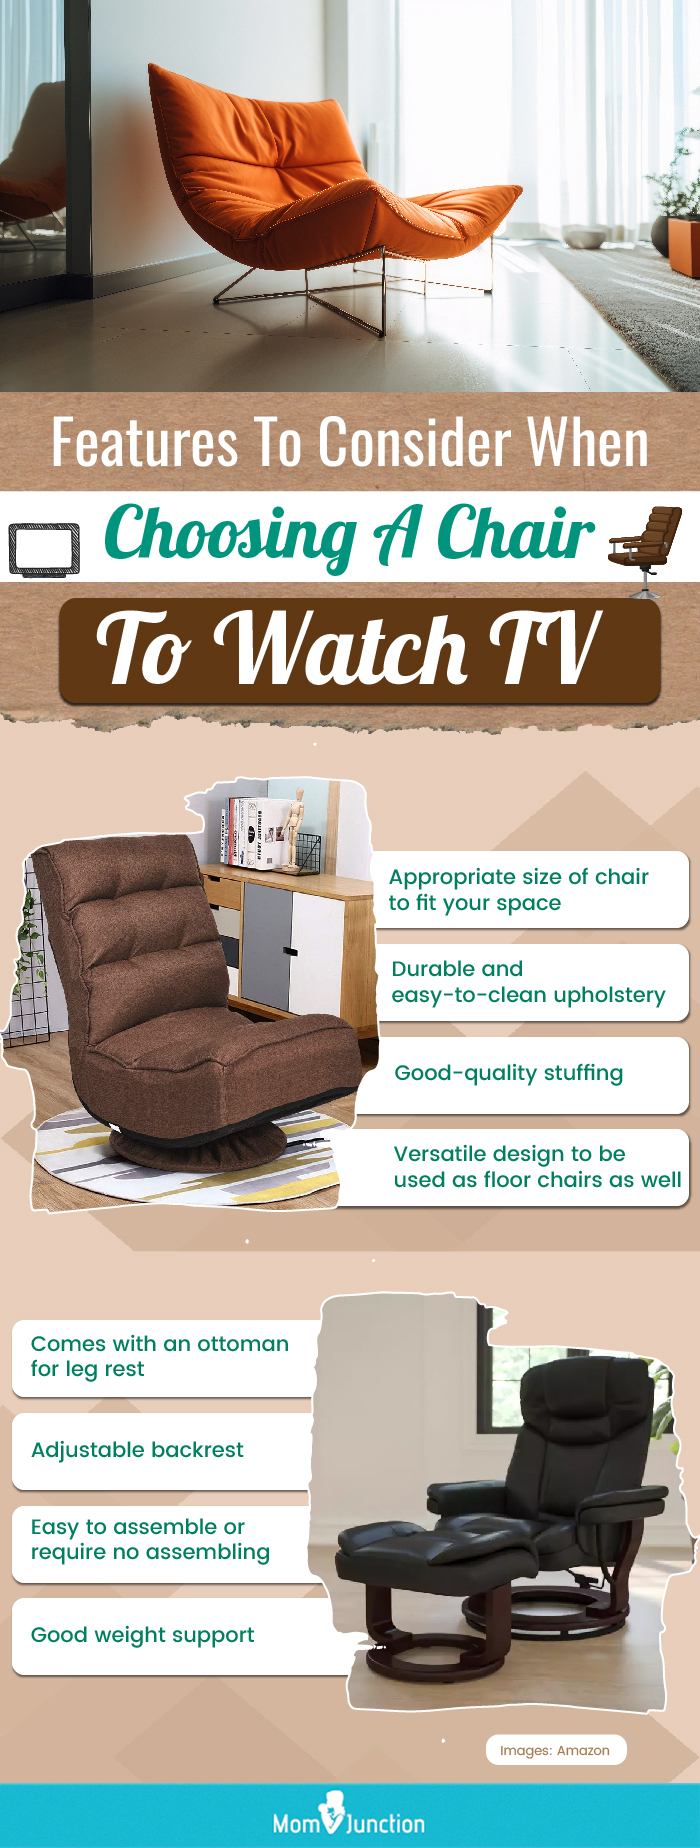 Features To Consider When Choosing A Chair To Watch TV (infographic)